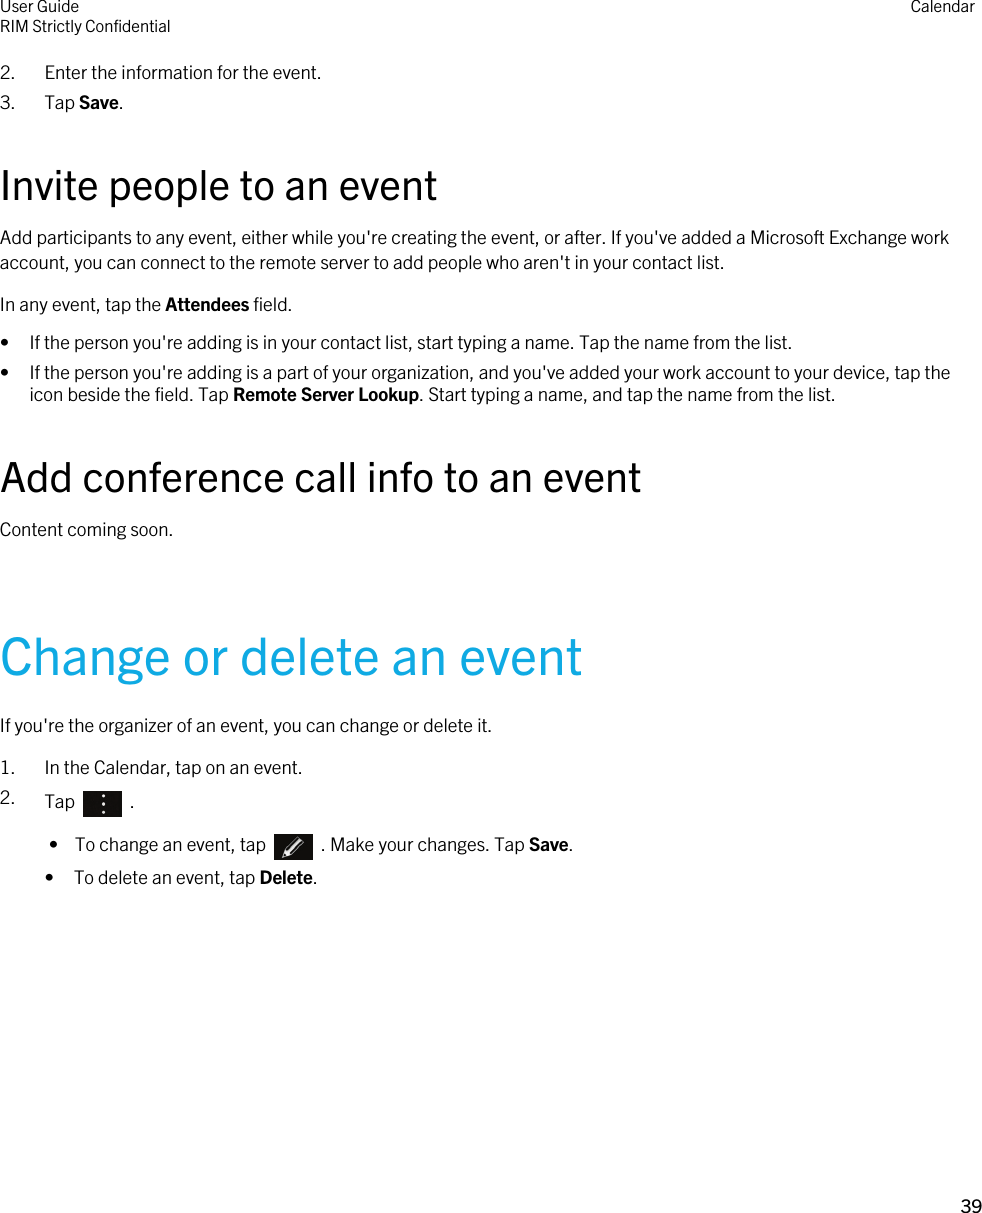 2. Enter the information for the event.3. Tap Save.Invite people to an eventAdd participants to any event, either while you&apos;re creating the event, or after. If you&apos;ve added a Microsoft Exchange work account, you can connect to the remote server to add people who aren&apos;t in your contact list.In any event, tap the Attendees field.• If the person you&apos;re adding is in your contact list, start typing a name. Tap the name from the list.• If the person you&apos;re adding is a part of your organization, and you&apos;ve added your work account to your device, tap the icon beside the field. Tap Remote Server Lookup. Start typing a name, and tap the name from the list.Add conference call info to an eventContent coming soon.Change or delete an eventIf you&apos;re the organizer of an event, you can change or delete it.1. In the Calendar, tap on an event.2. Tap    . •  To change an event, tap    . Make your changes. Tap Save.• To delete an event, tap Delete.User GuideRIM Strictly ConfidentialCalendar39 